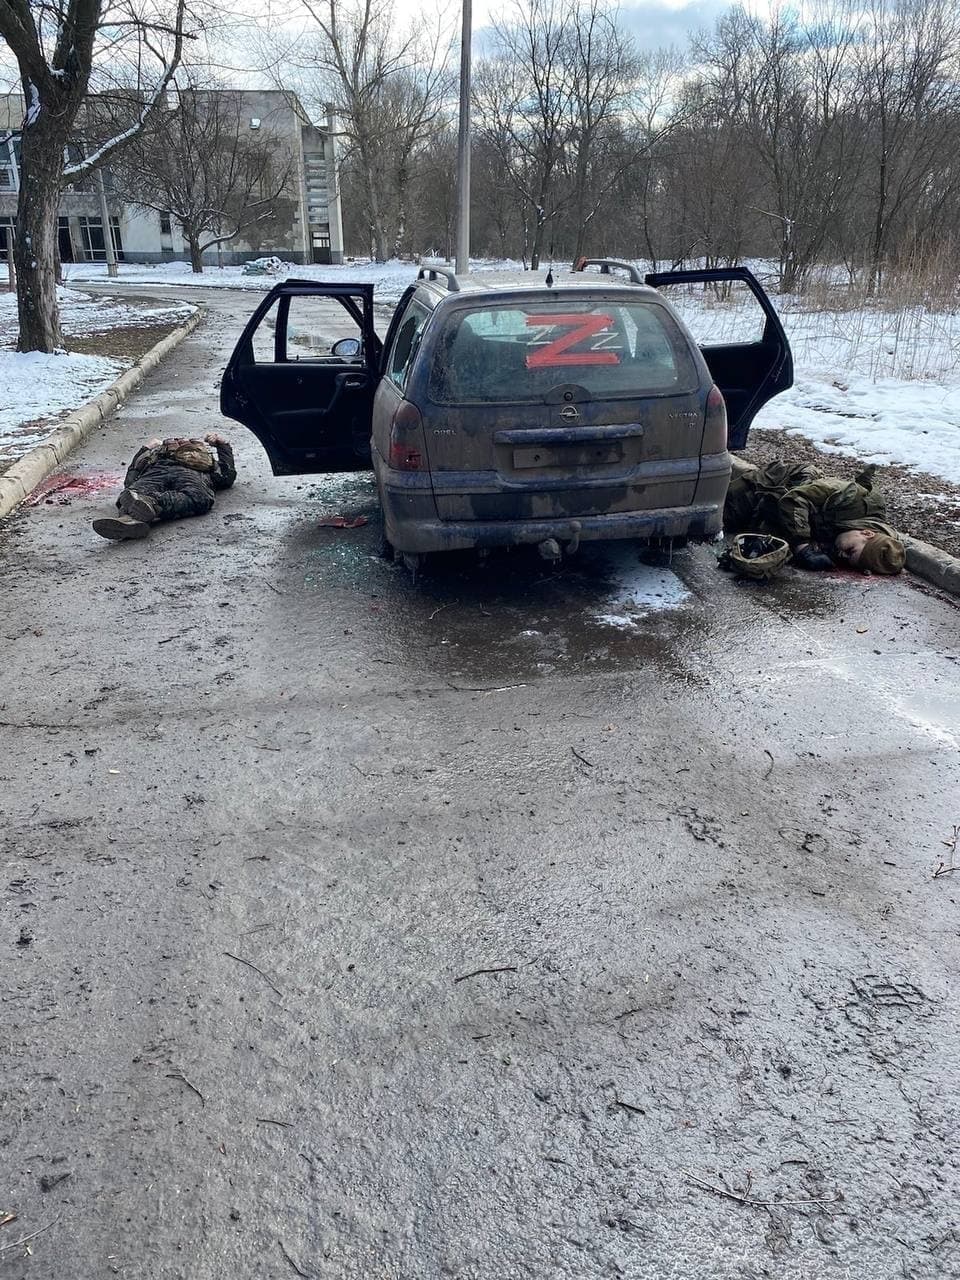 Corpses in military uniform and a Z sign on a car. Lugansk